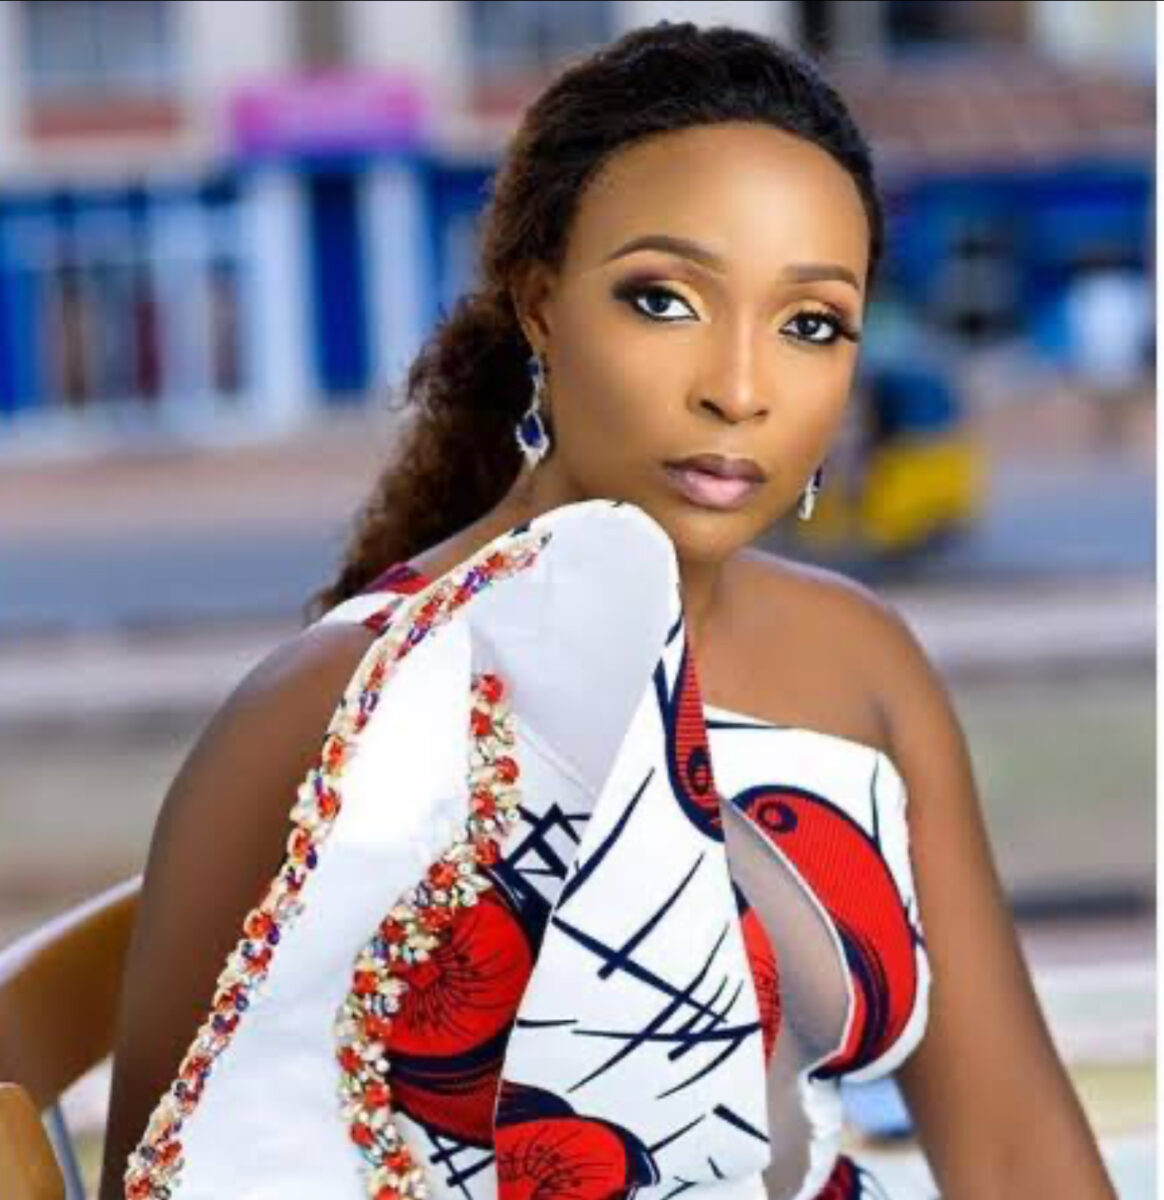 “It’s No Shame Being A Divorcee” Blessing Okoro Hits Back